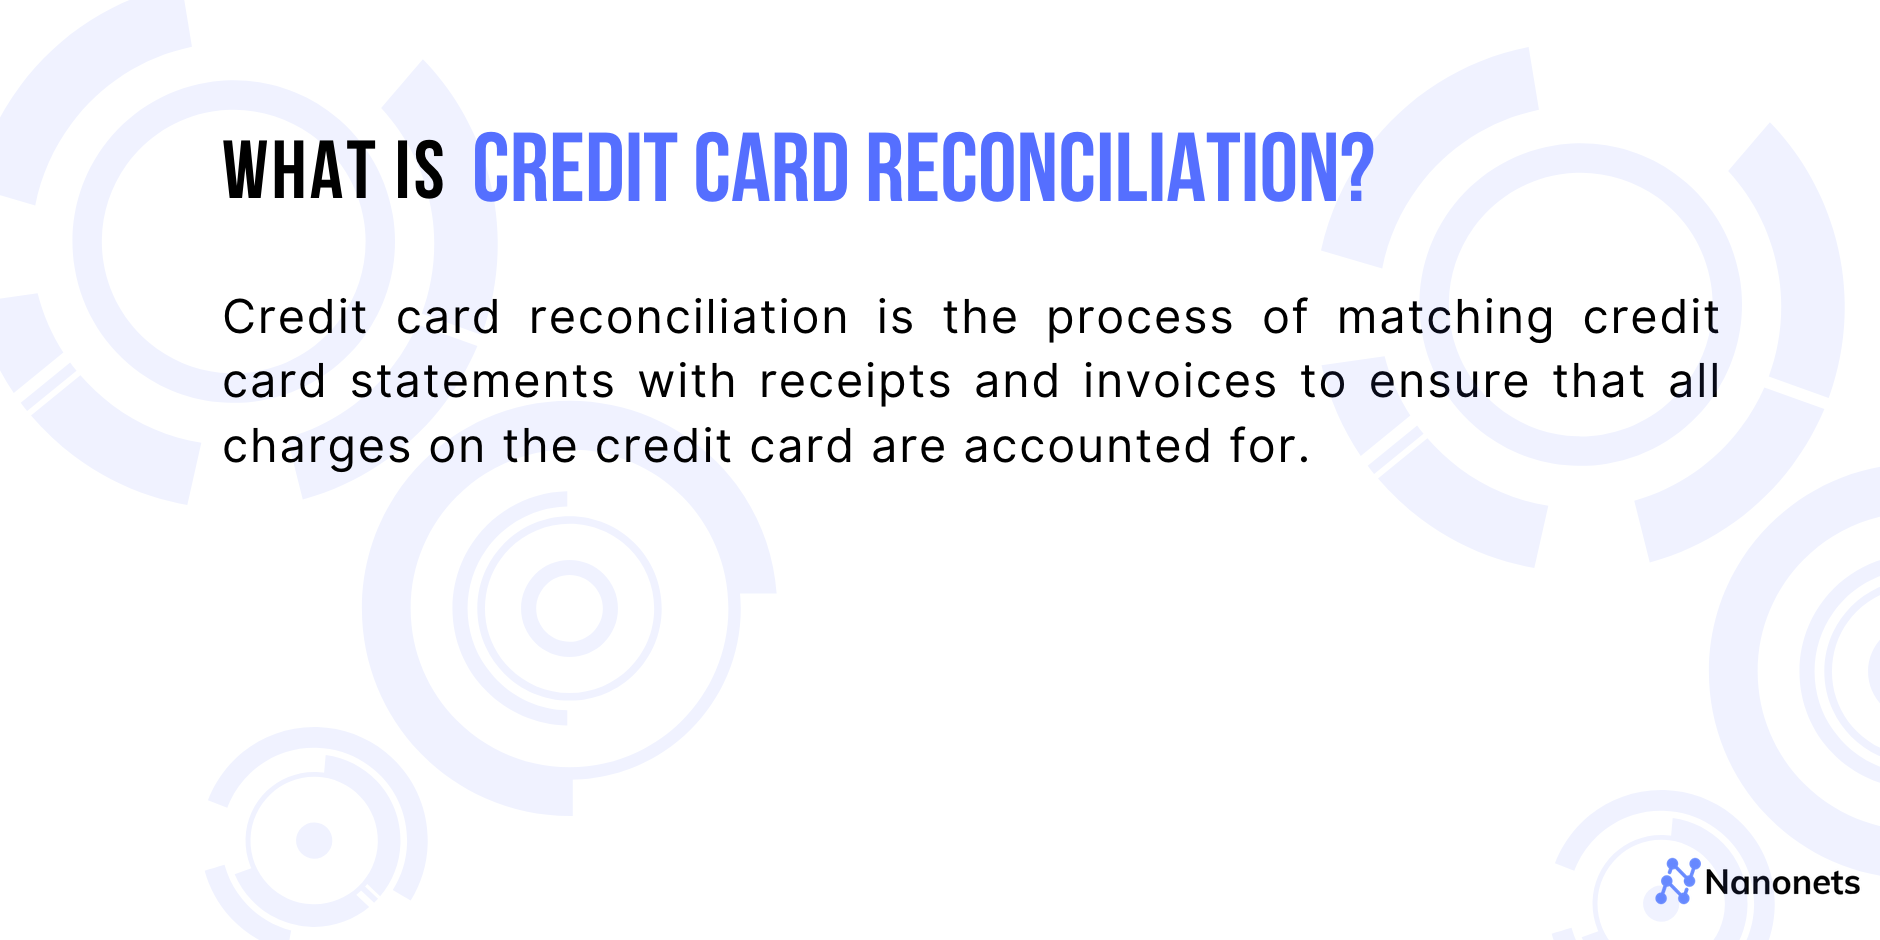 What is credit card reconciliation?